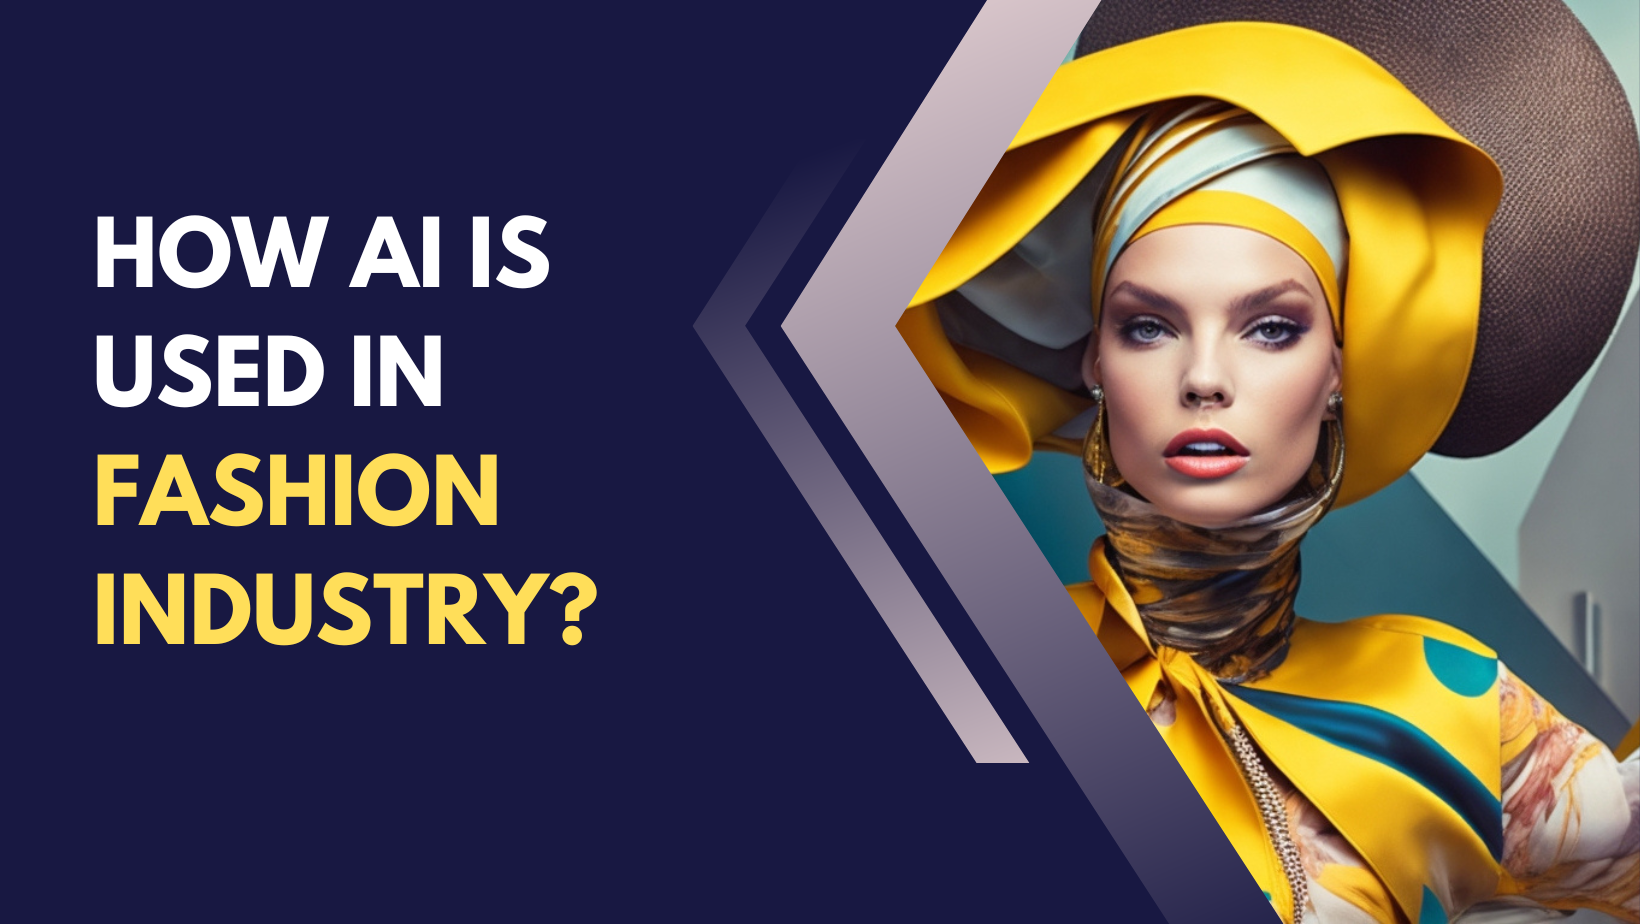 How AI is used in fashion industry?